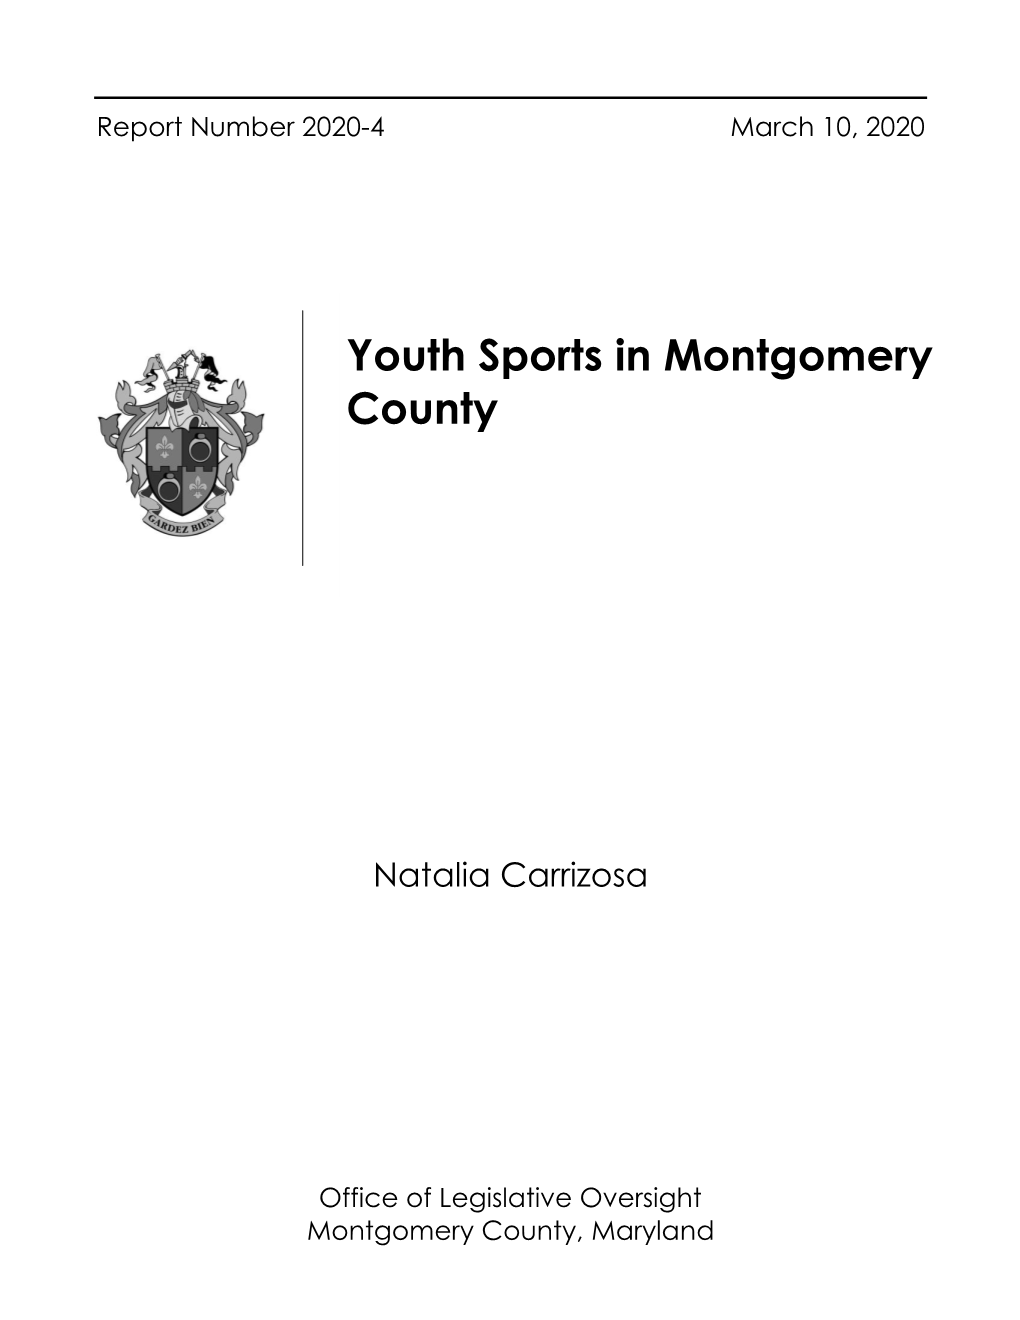 Youth Sports in Montgomery County